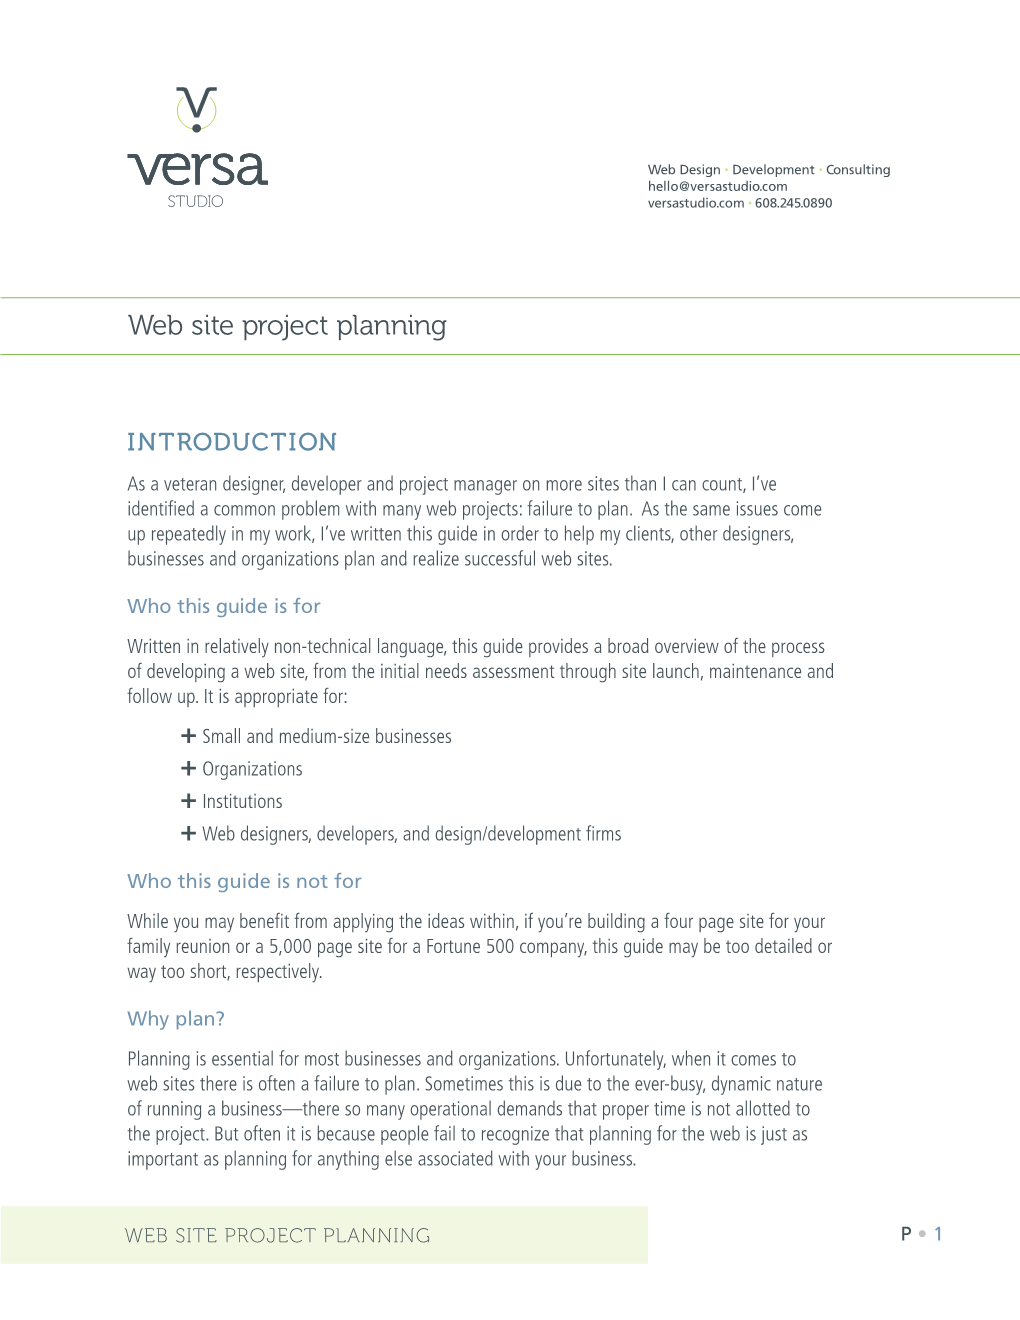 Web Site Project Planning